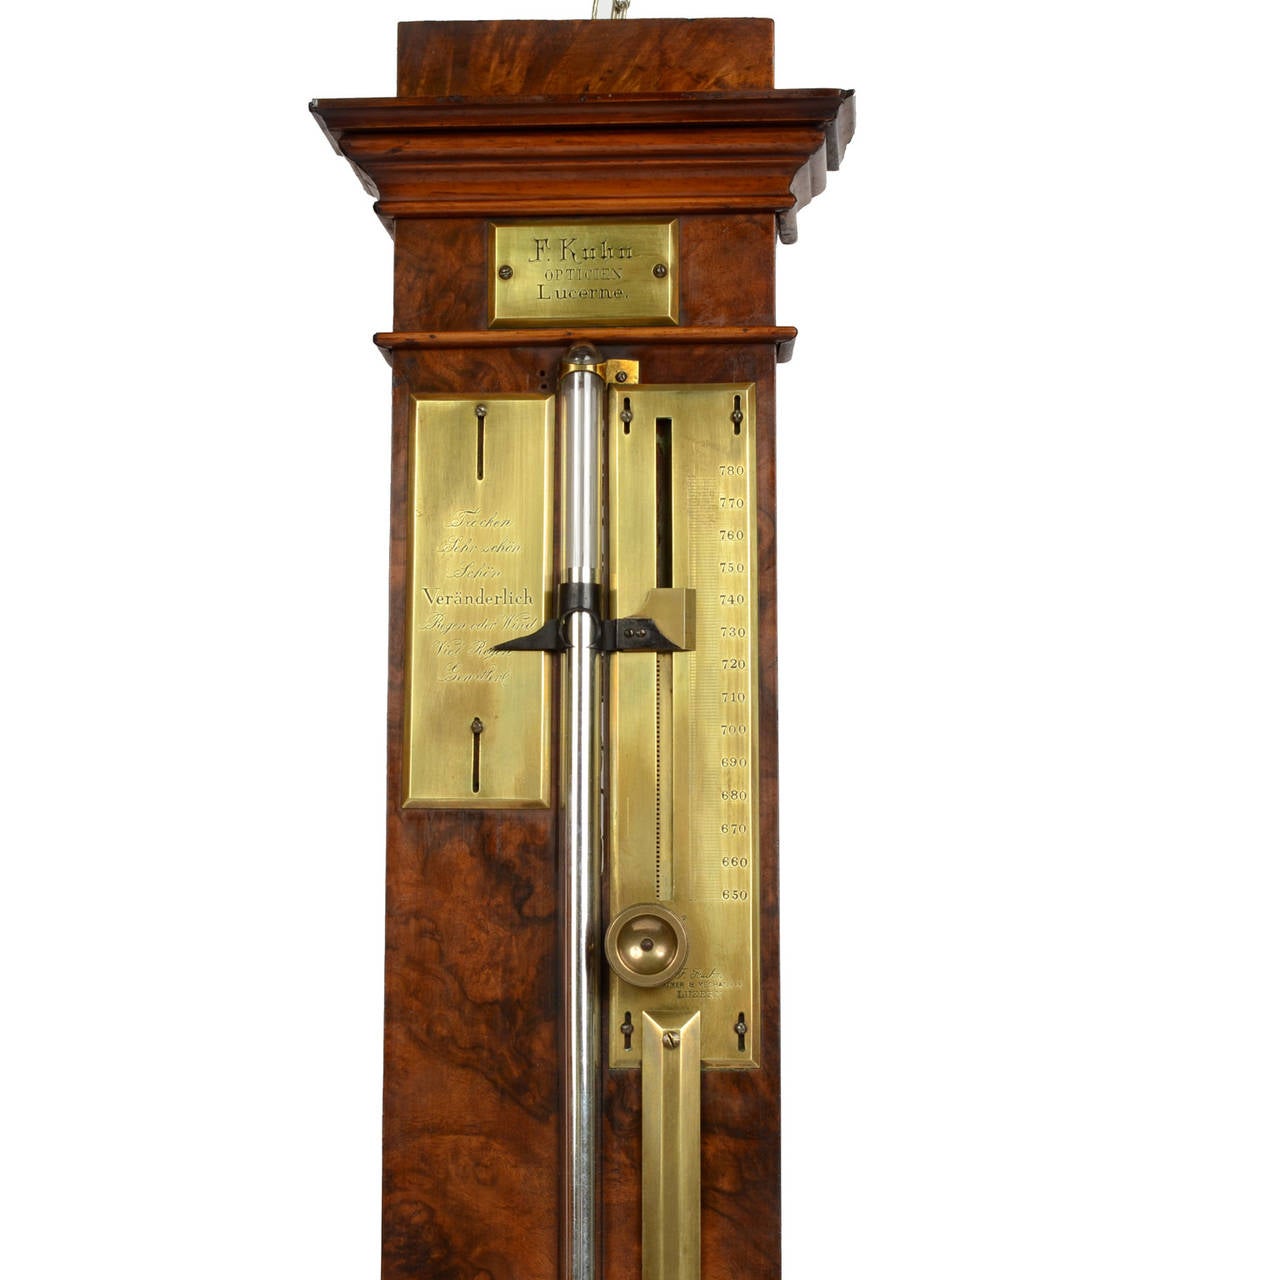 Rare and elegant barometer and mercury thermometer made in the first half of the nineteenth century by the optician from Lucerne F. Kuhn. The barometric tube is mounted on a walnut plank and the nonius and double reading scales of the thermometer